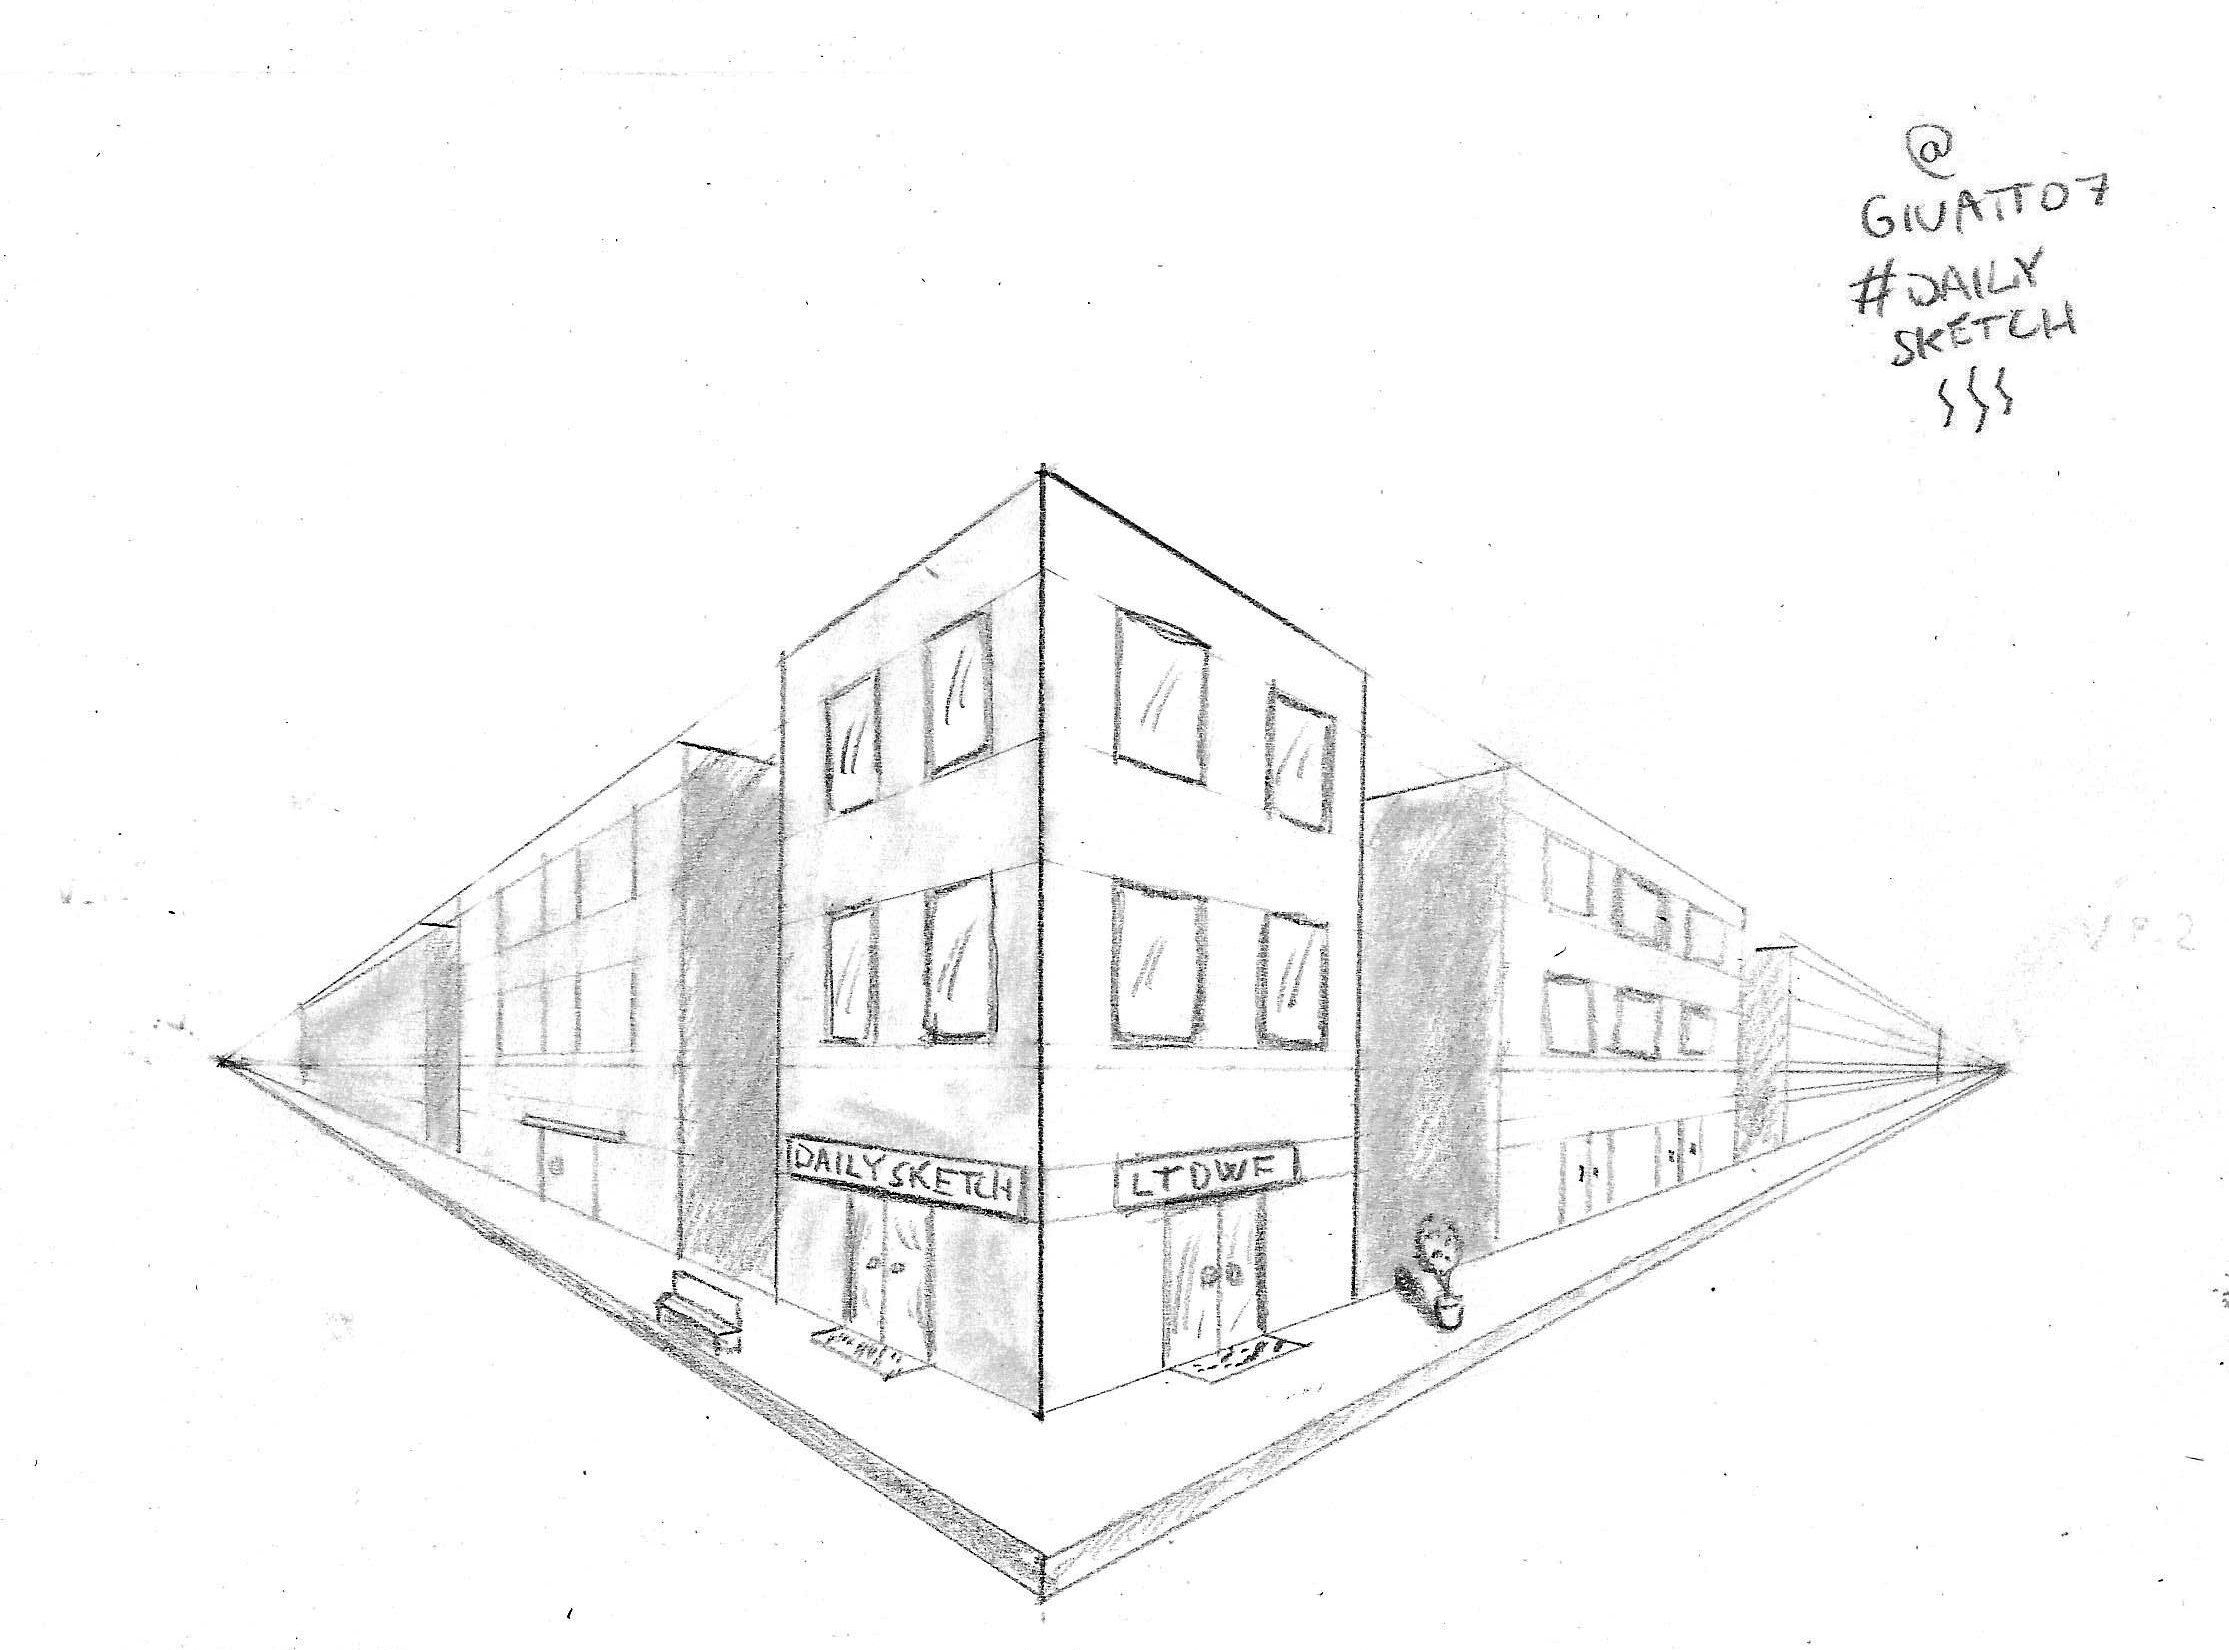 Perspective Building Sketch at Explore collection